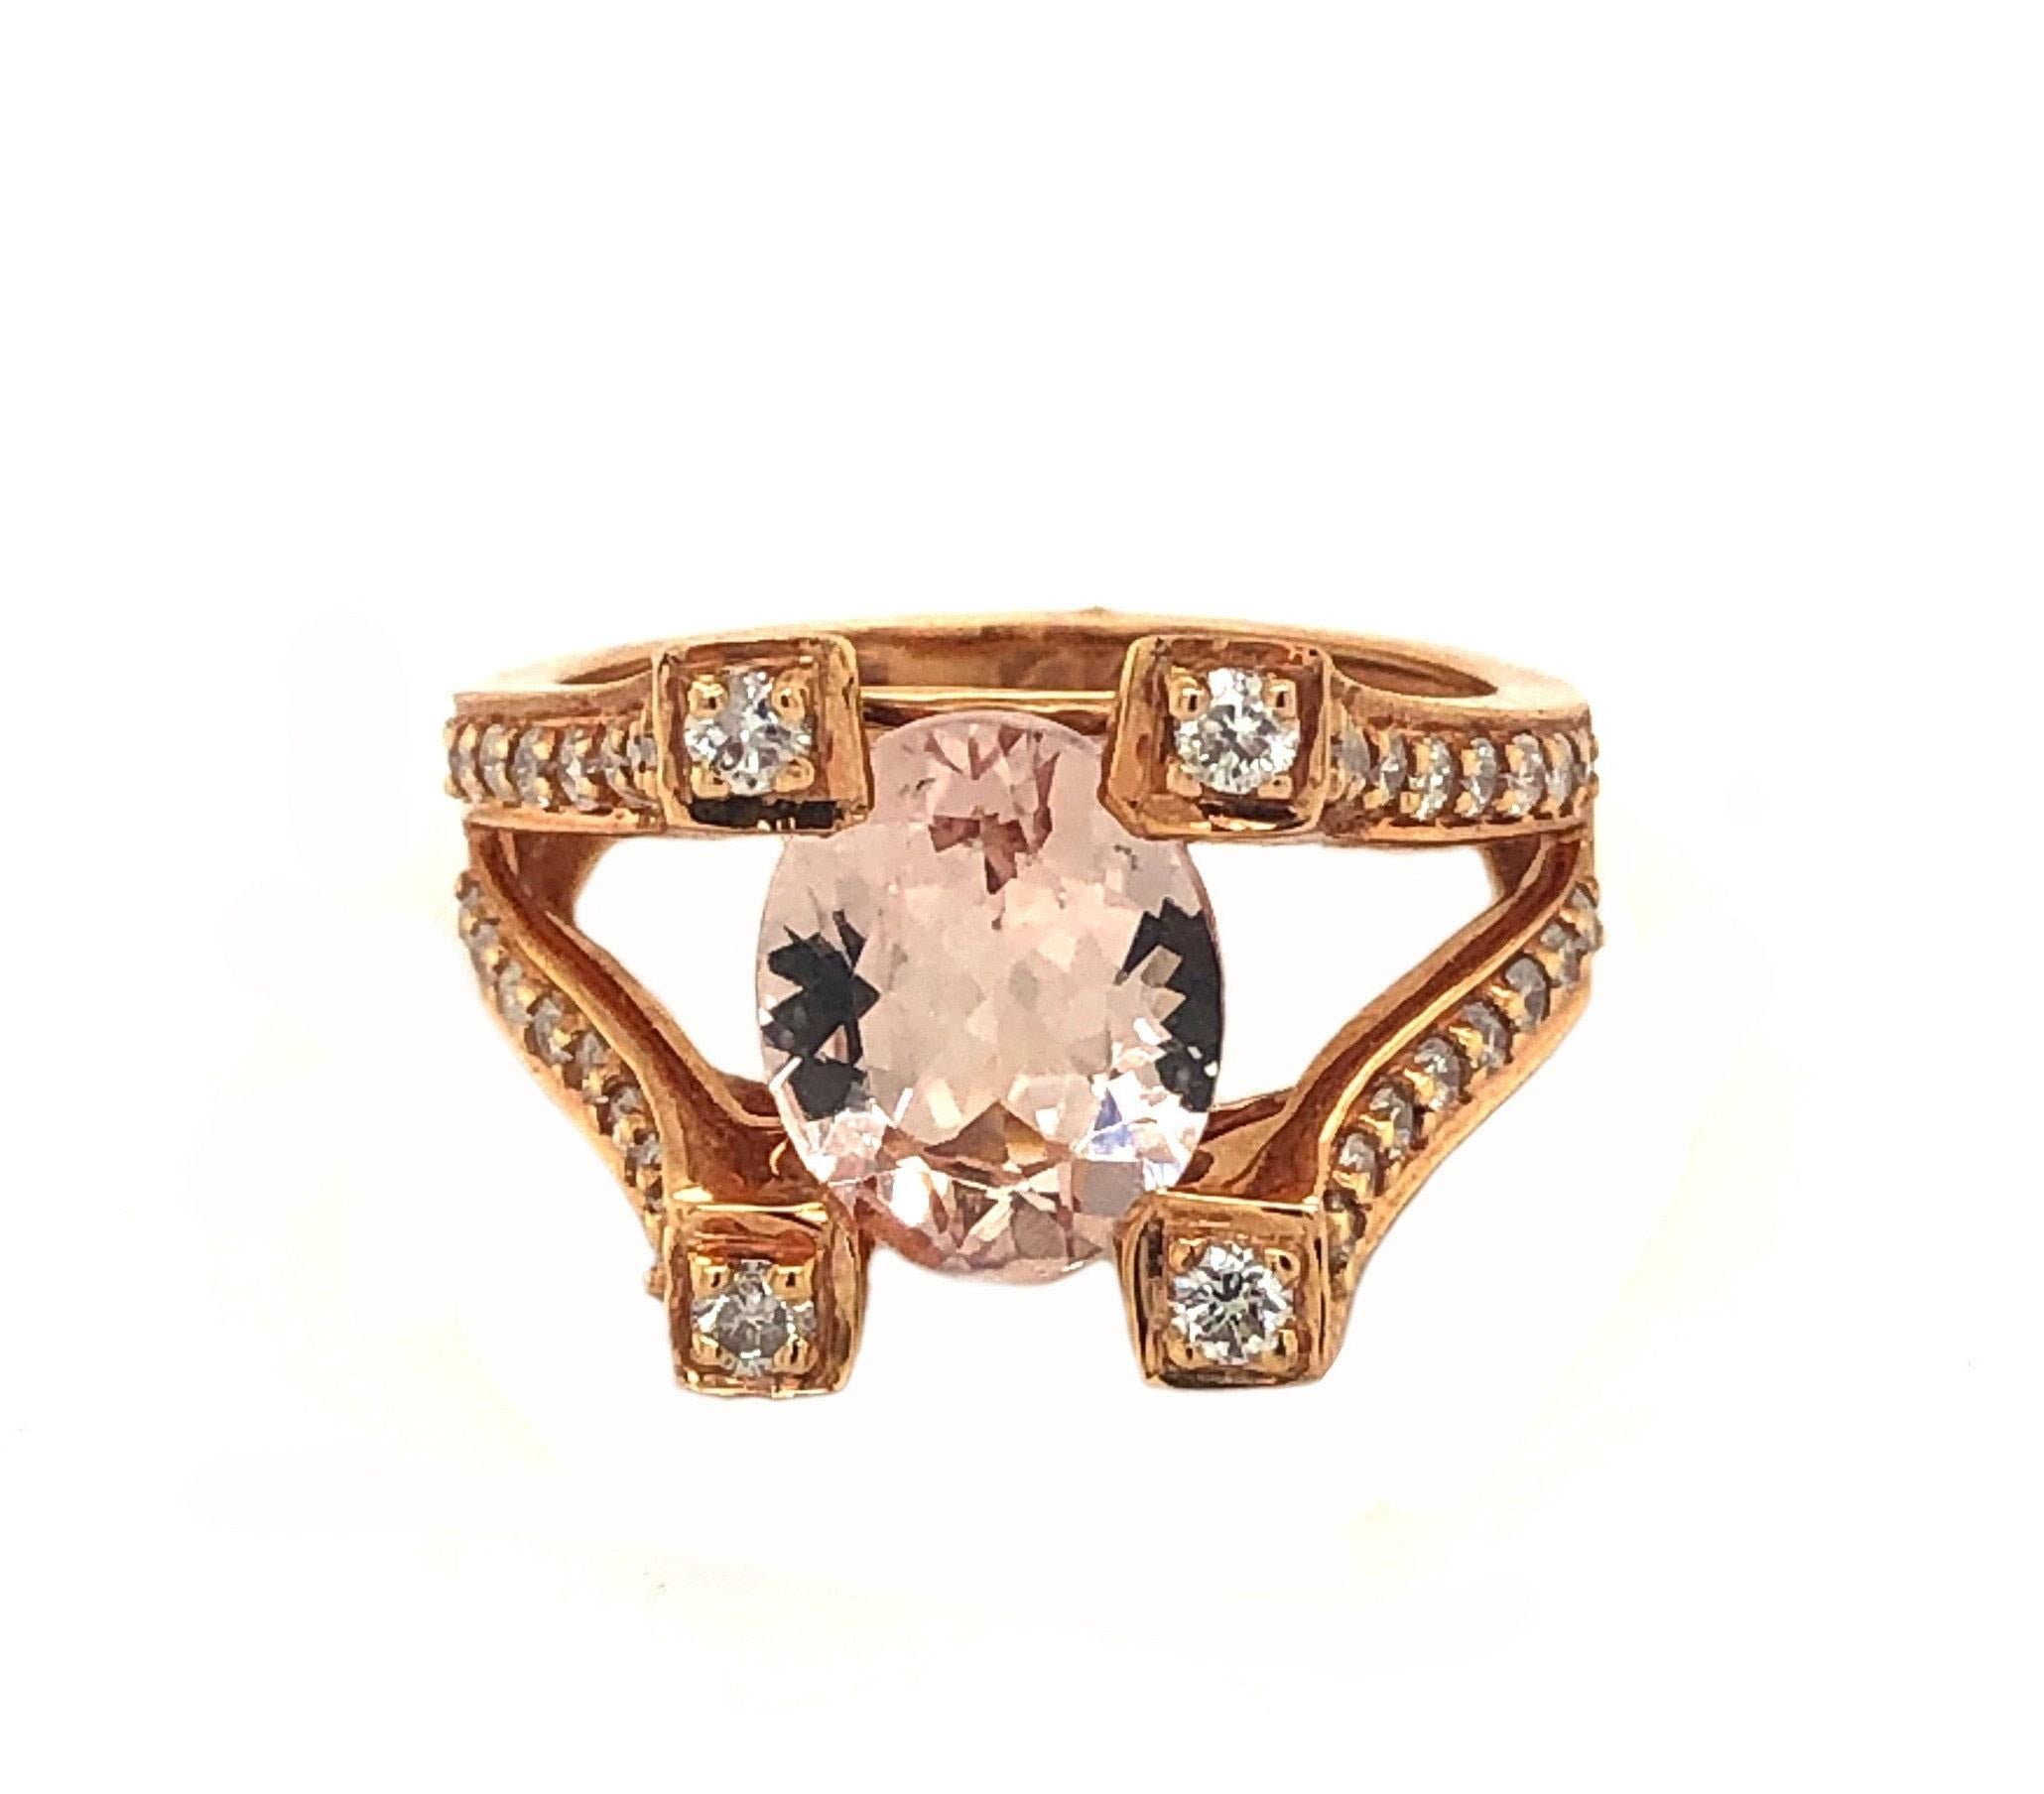 This is a marvelous natural 2.16ct morganite and diamond cocktail ring set in solid 14K rose gold. The natural Oval Morganite has an excellent peachy pink color and is set on top of a unique and curved pillared diamond encrusted shank. The ring is